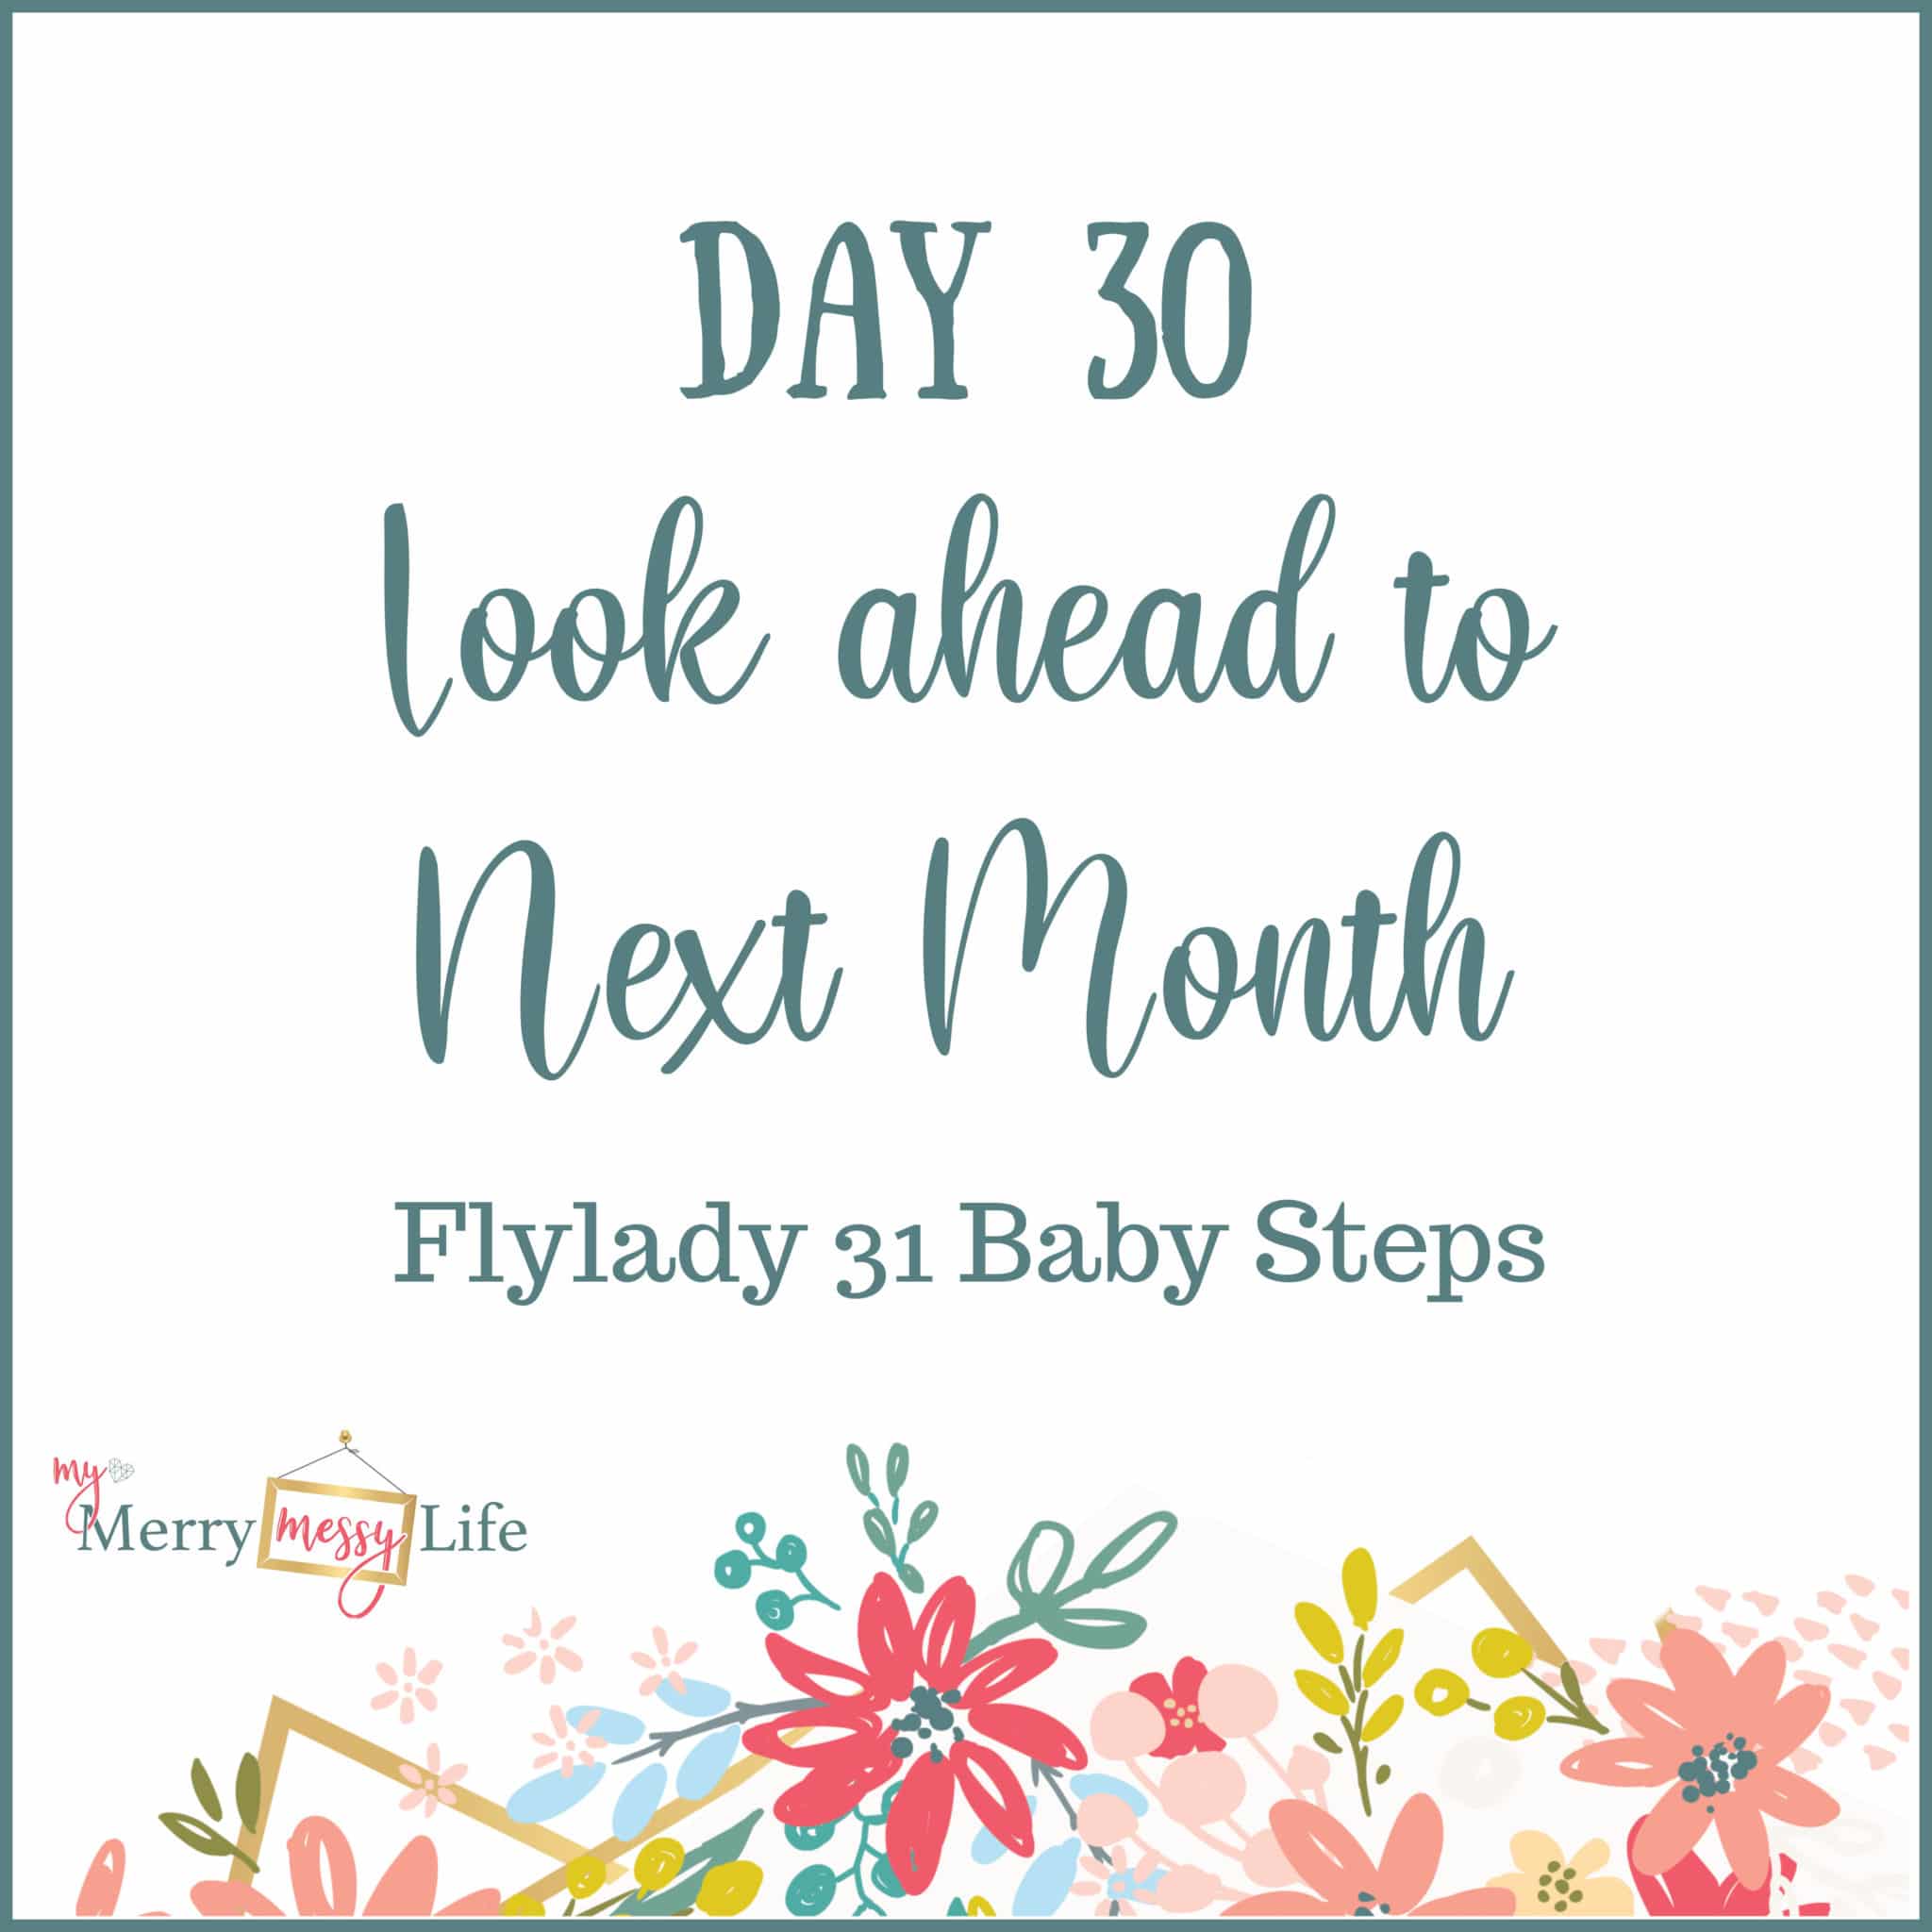 Flylady 31 Baby Steps - Day 30 - Look Ahead to Next Month